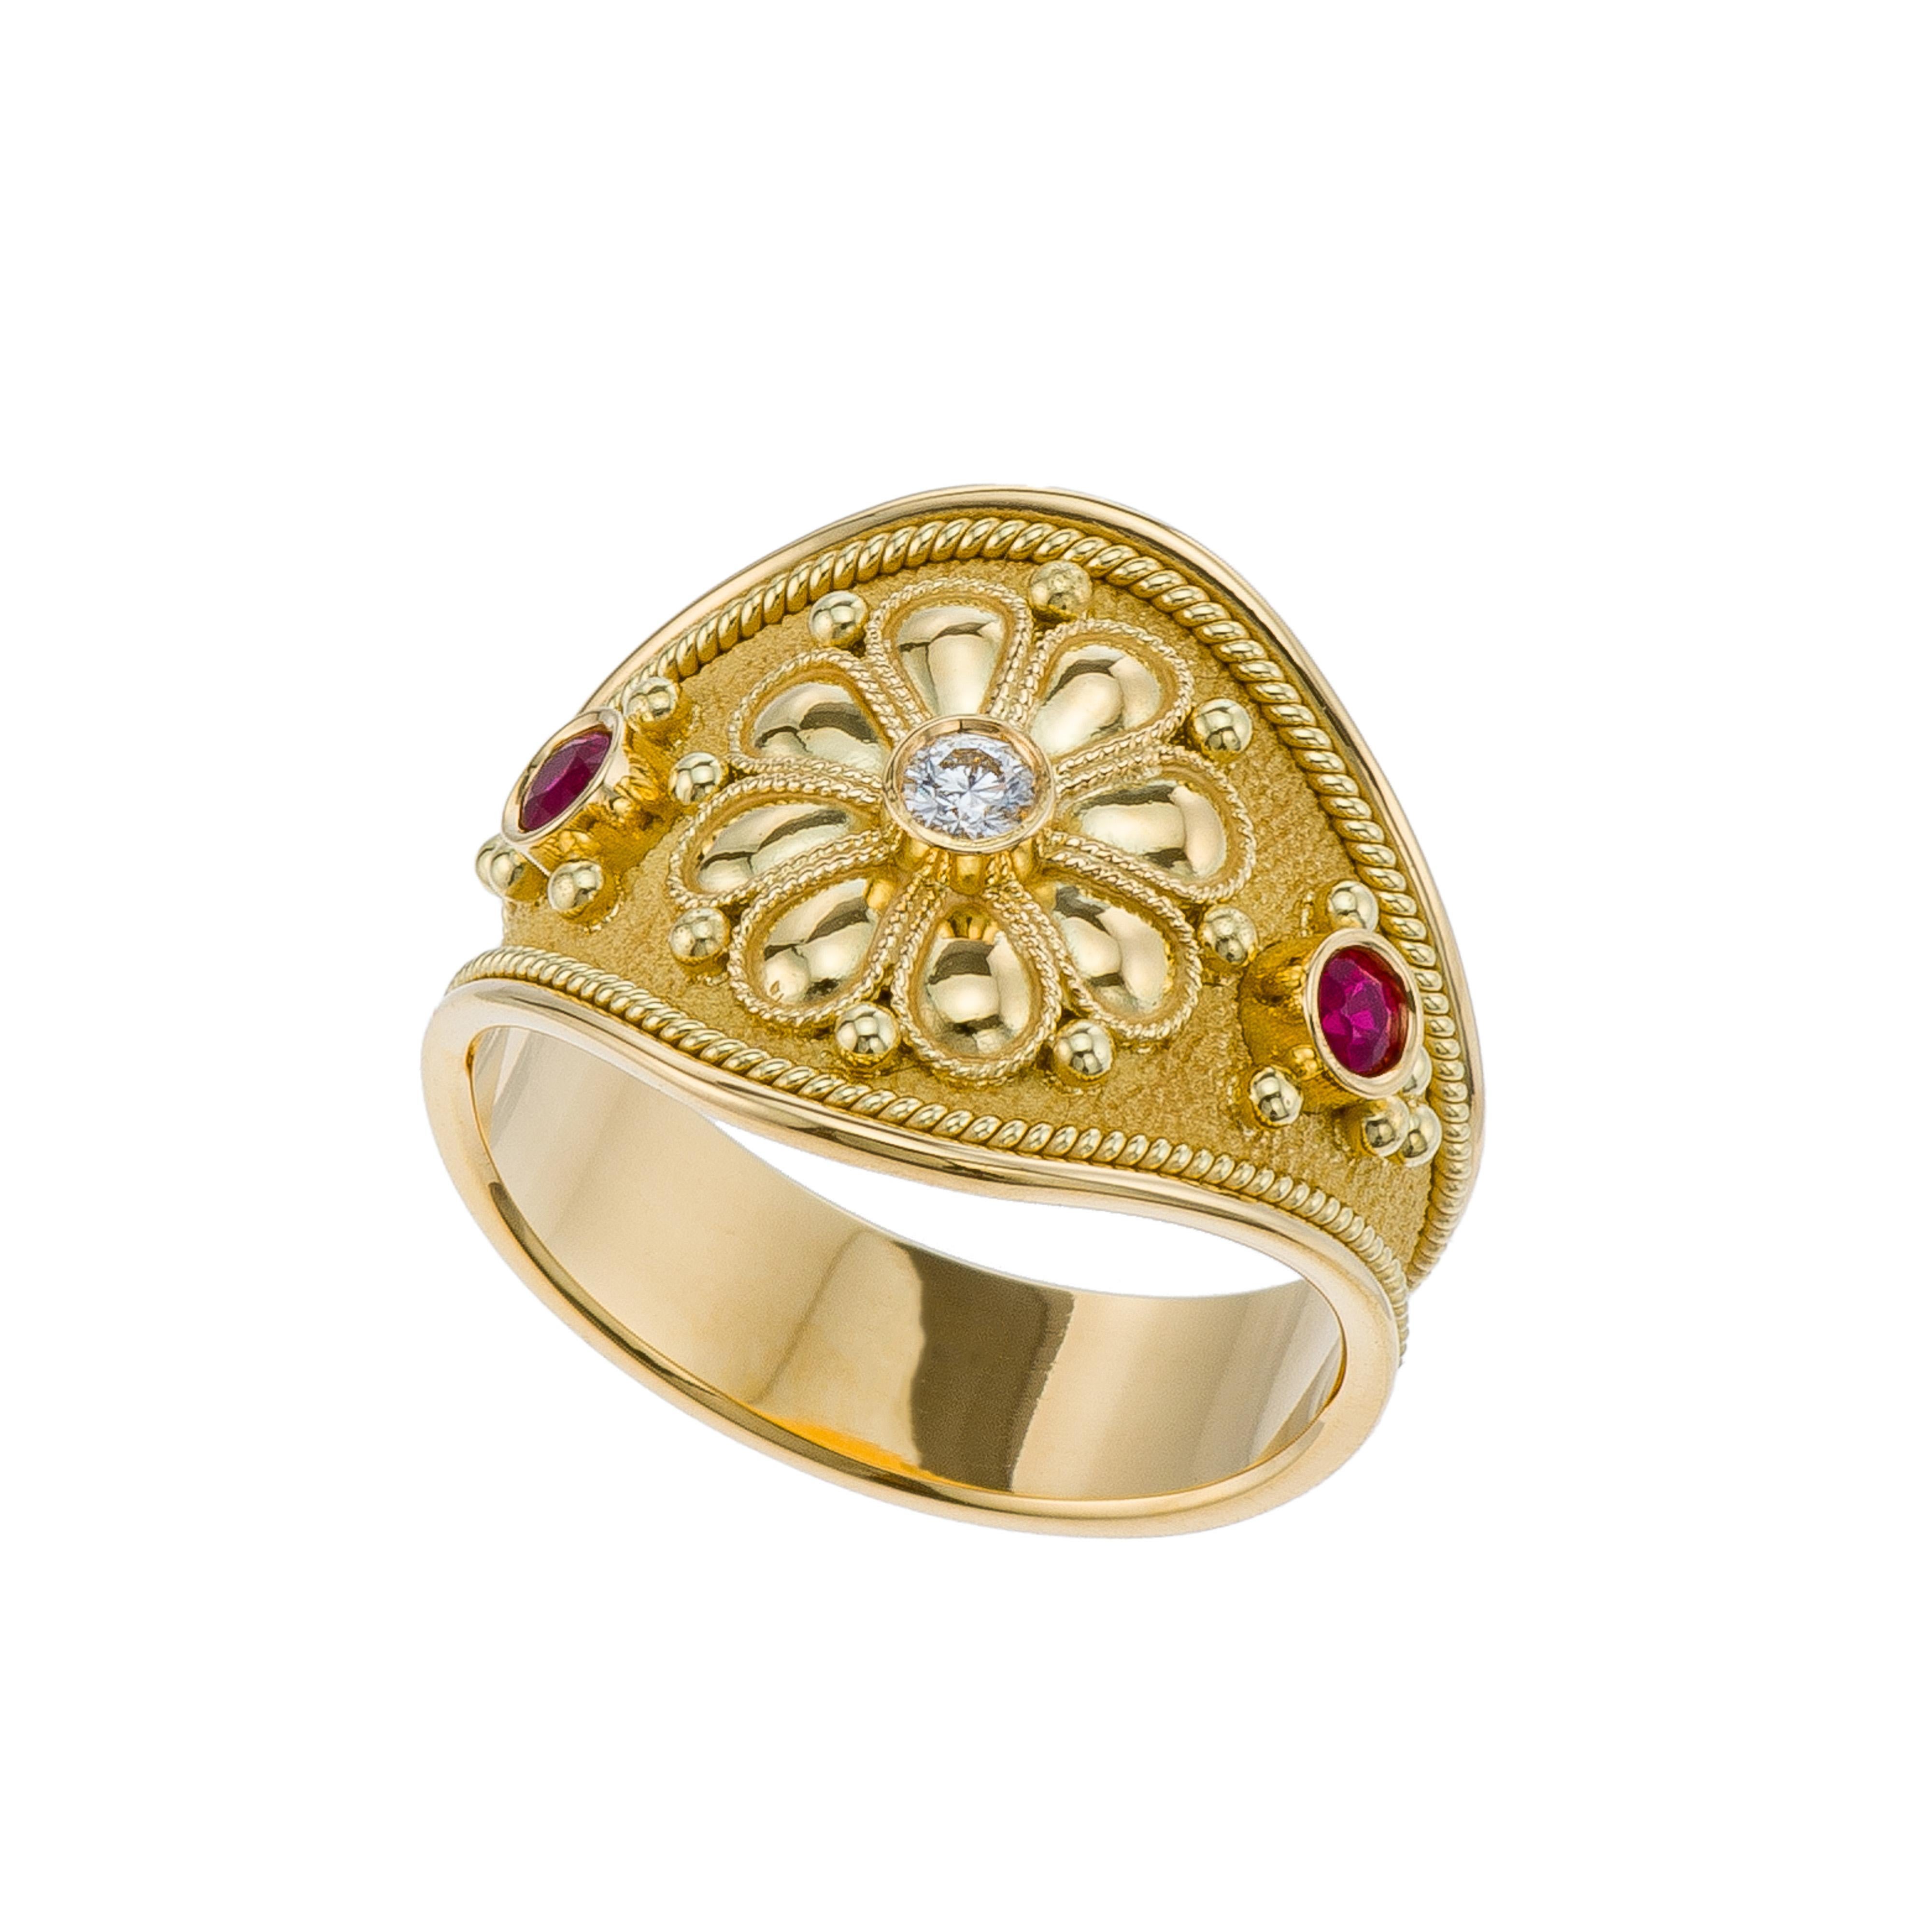 Gold Diamond Byzantine Daisy Ring with Rubies For Sale 2